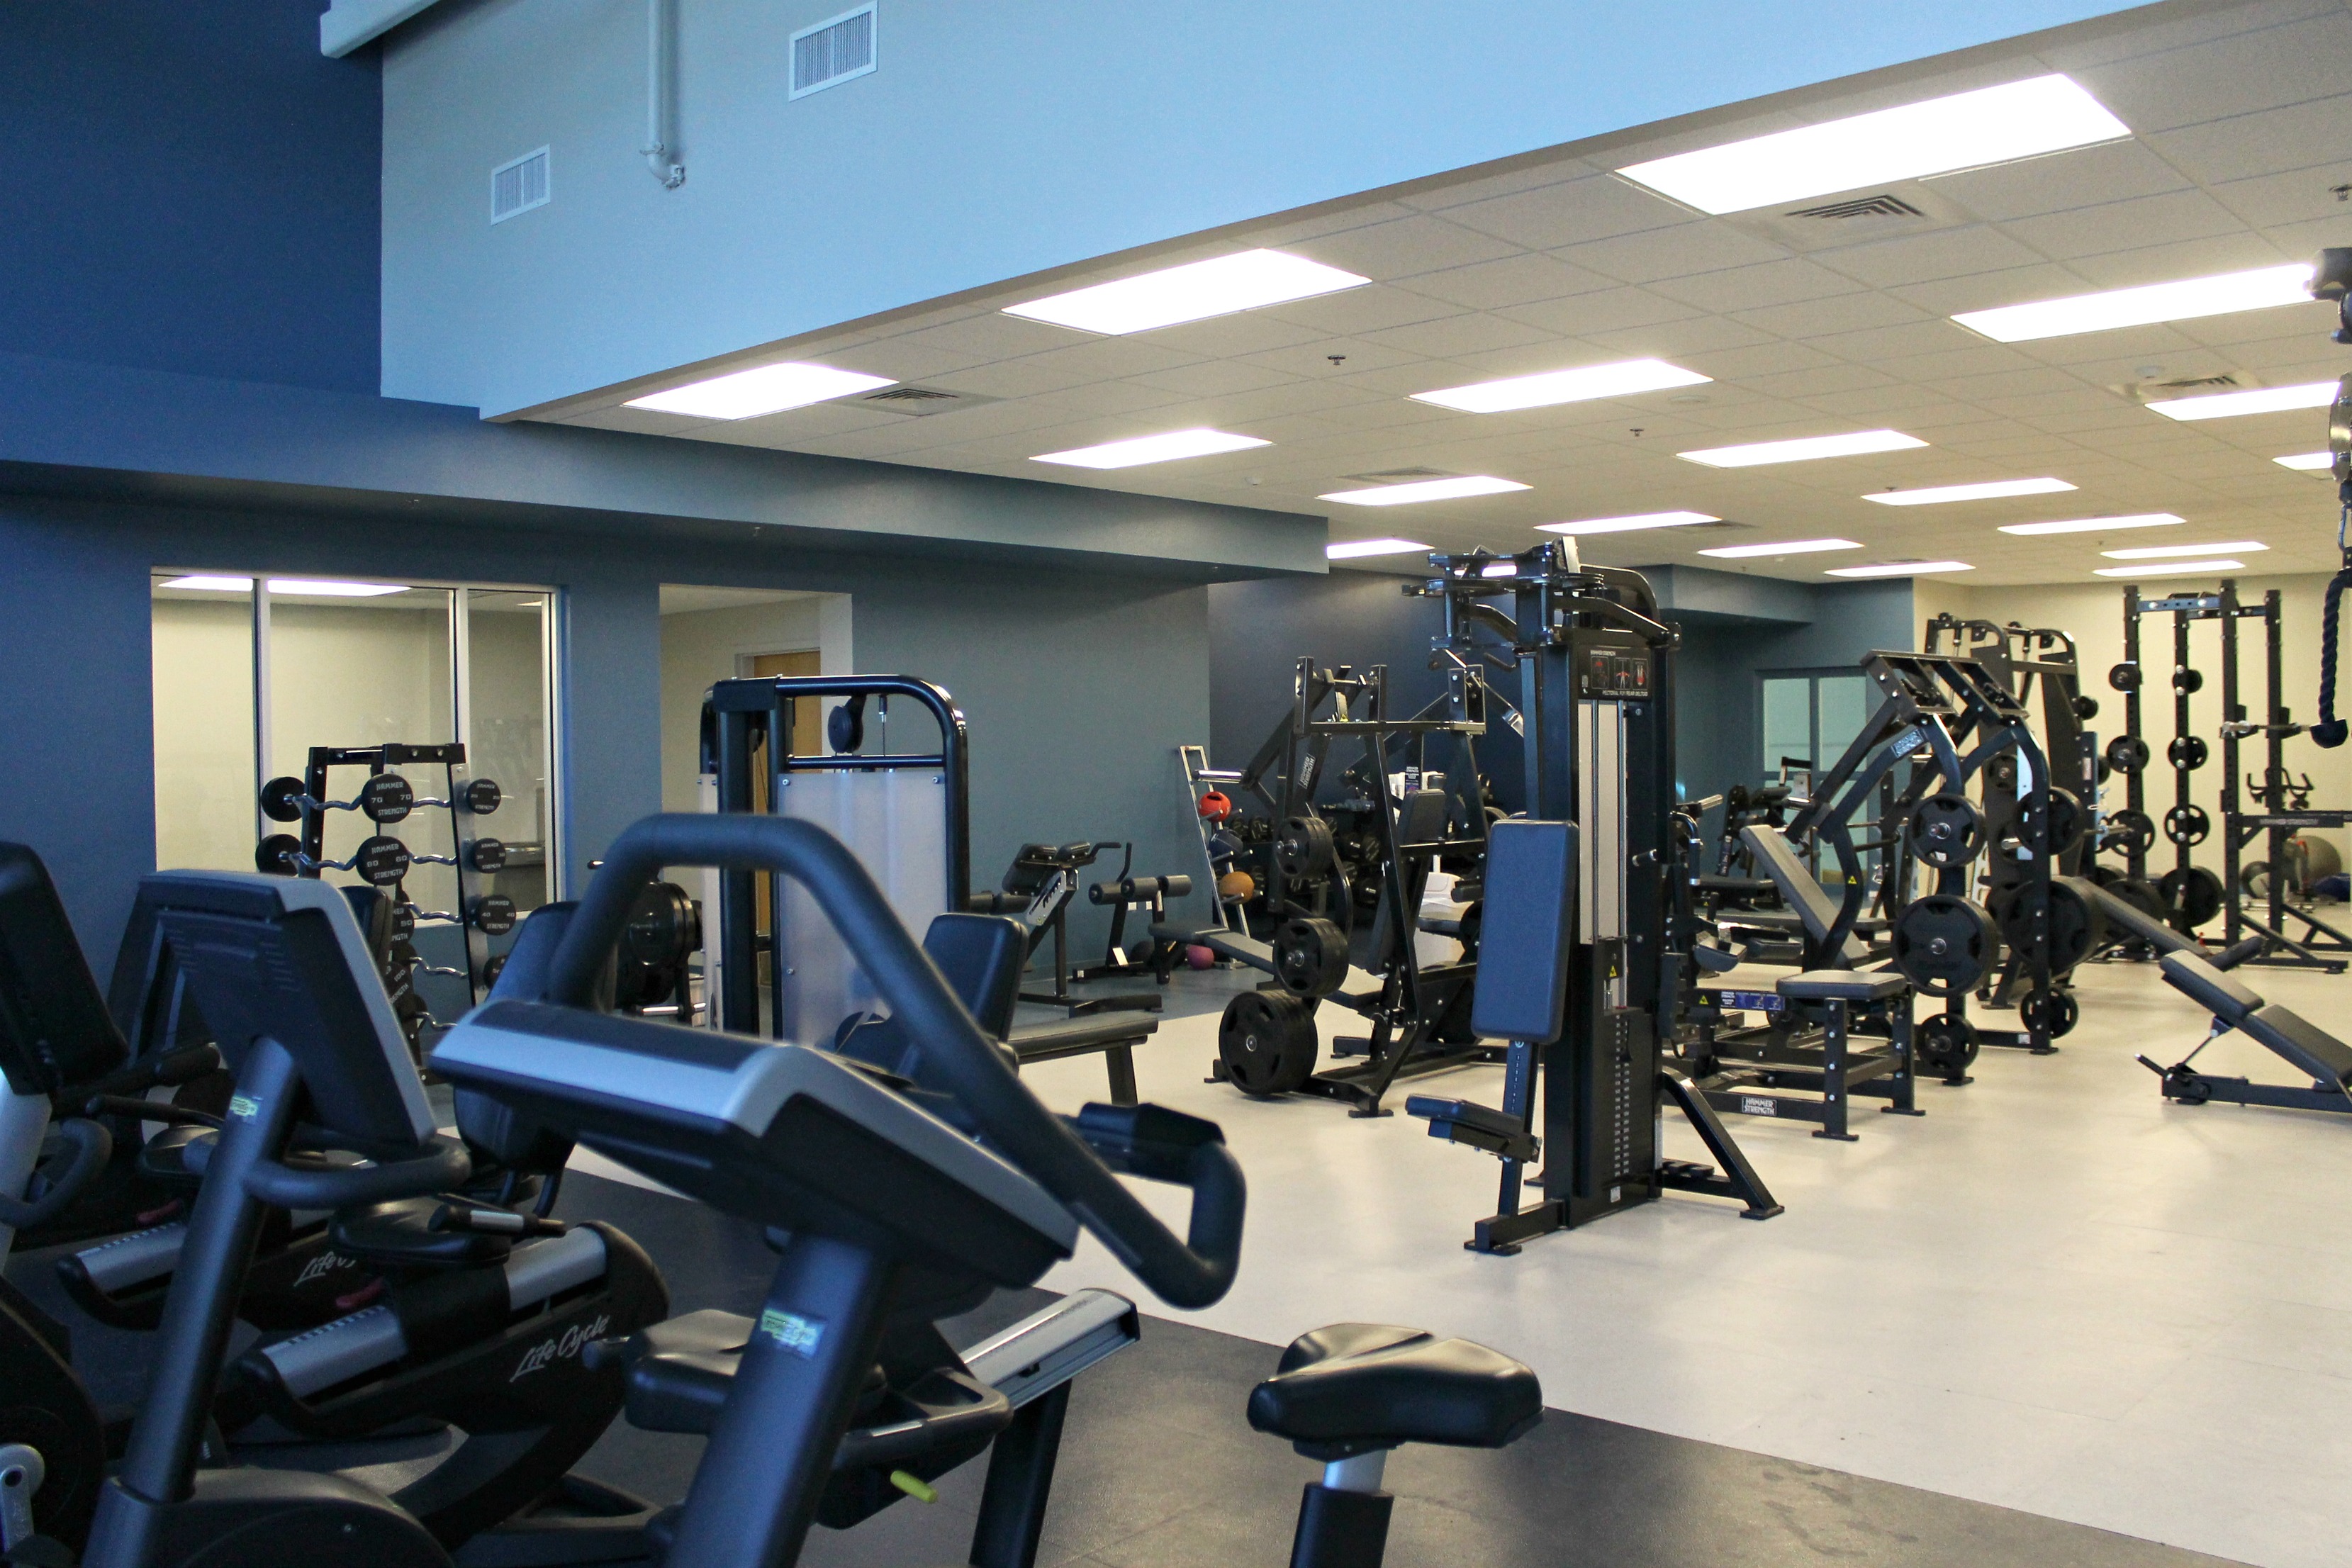 Interior of a gym with blue walls and rows of workout equipment and weights.